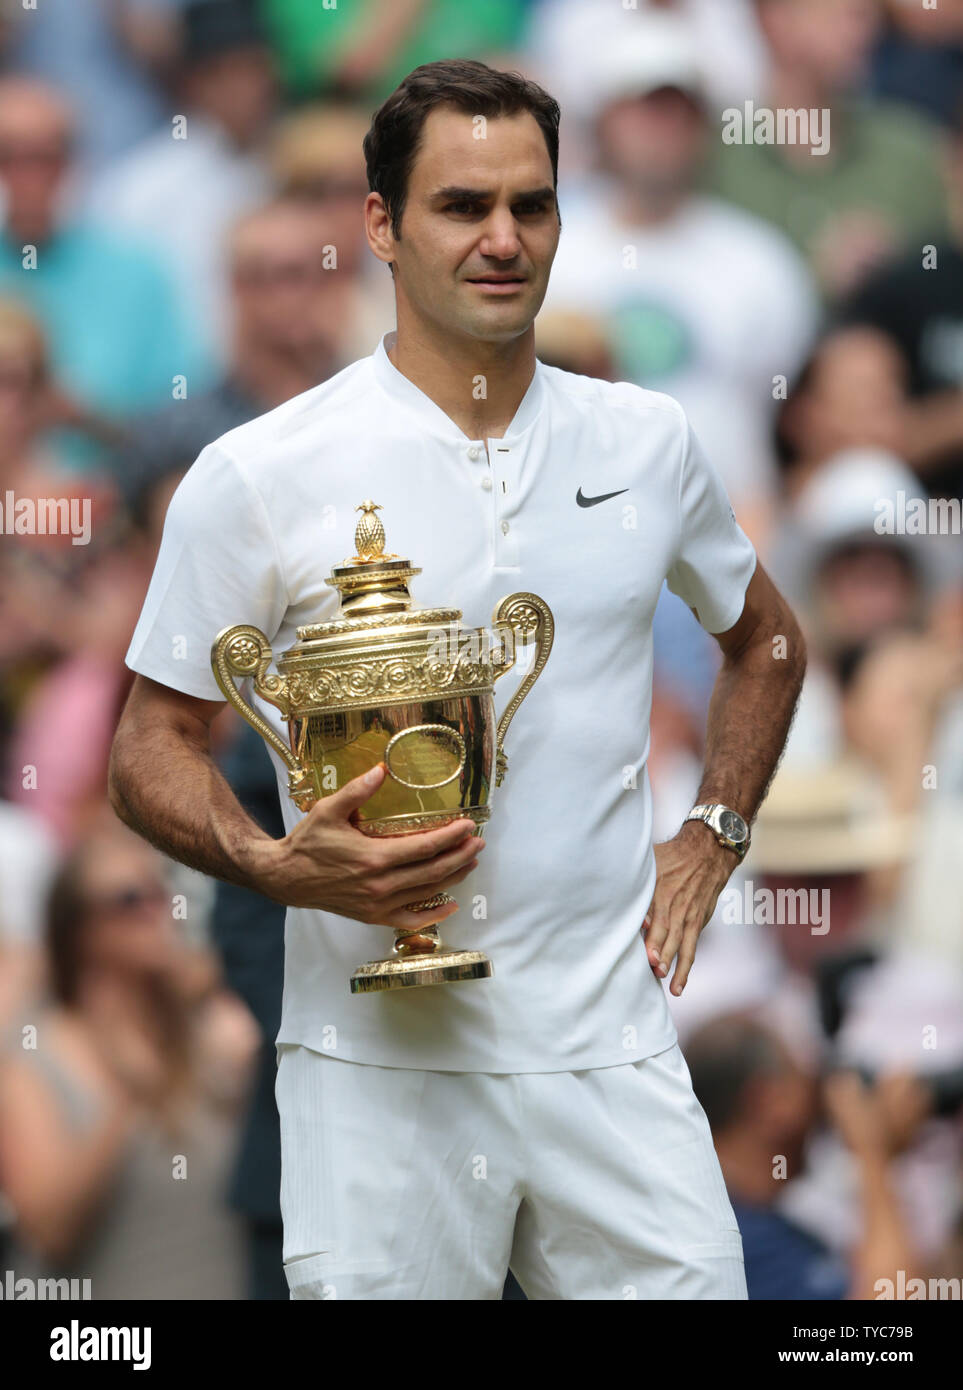 Assassinate Betsy Trotwood Imperative Swiss Roger Federer holds the Wimbledon Singles trophy after victory over  Croat Marin Cilic at the 2017 Wimbledon championships, London on July 16,  2017. Federer beat Cilic 6-3, 6-1, 6-4, to win